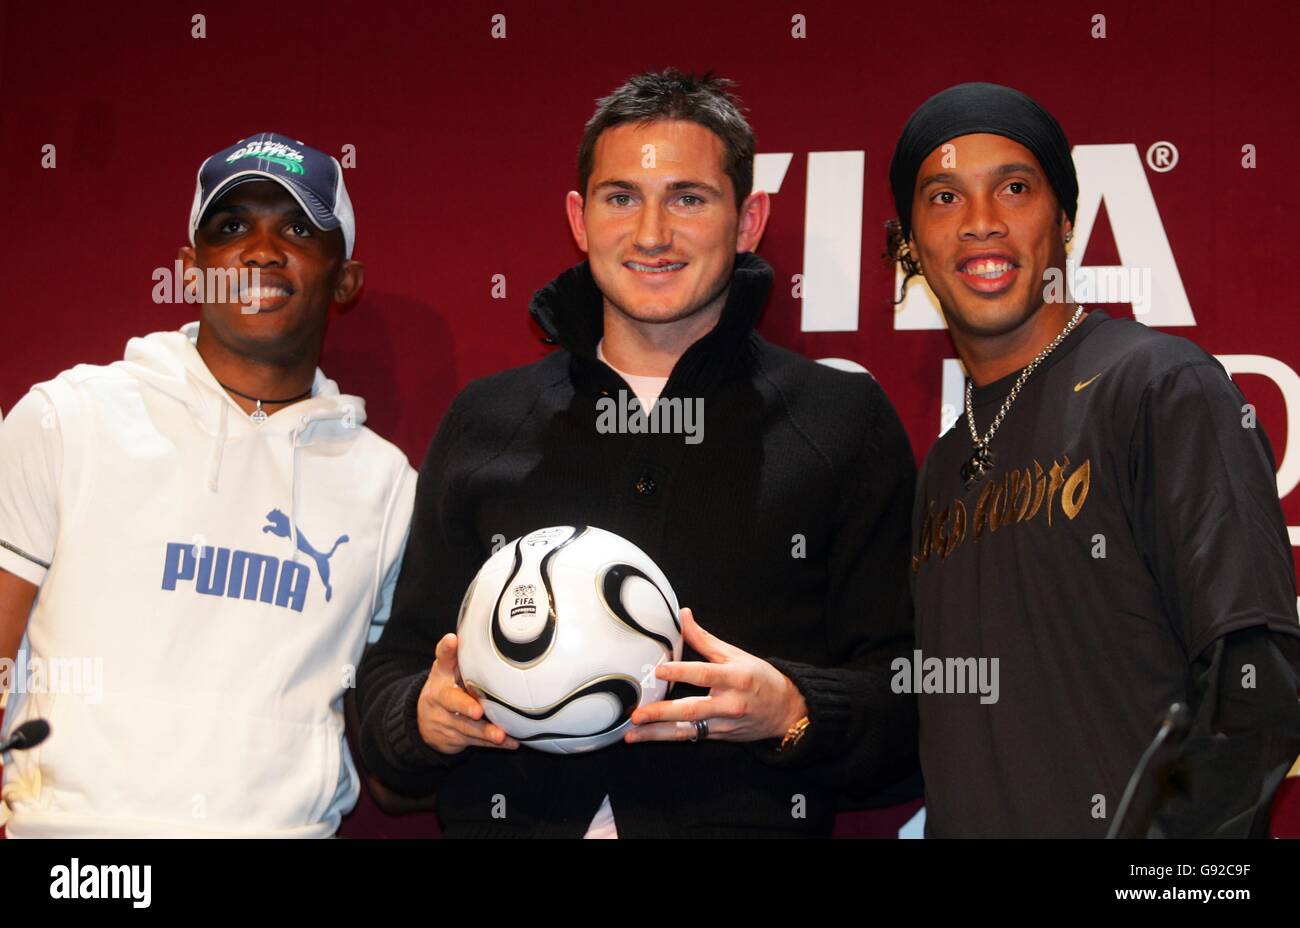 Contenders for World Player of the Year, L-R: Barcelona's Samuel Eto'o, Chelsea's Frank Lampard and Barcelona's Ronaldinho at the press conference Stock Photo